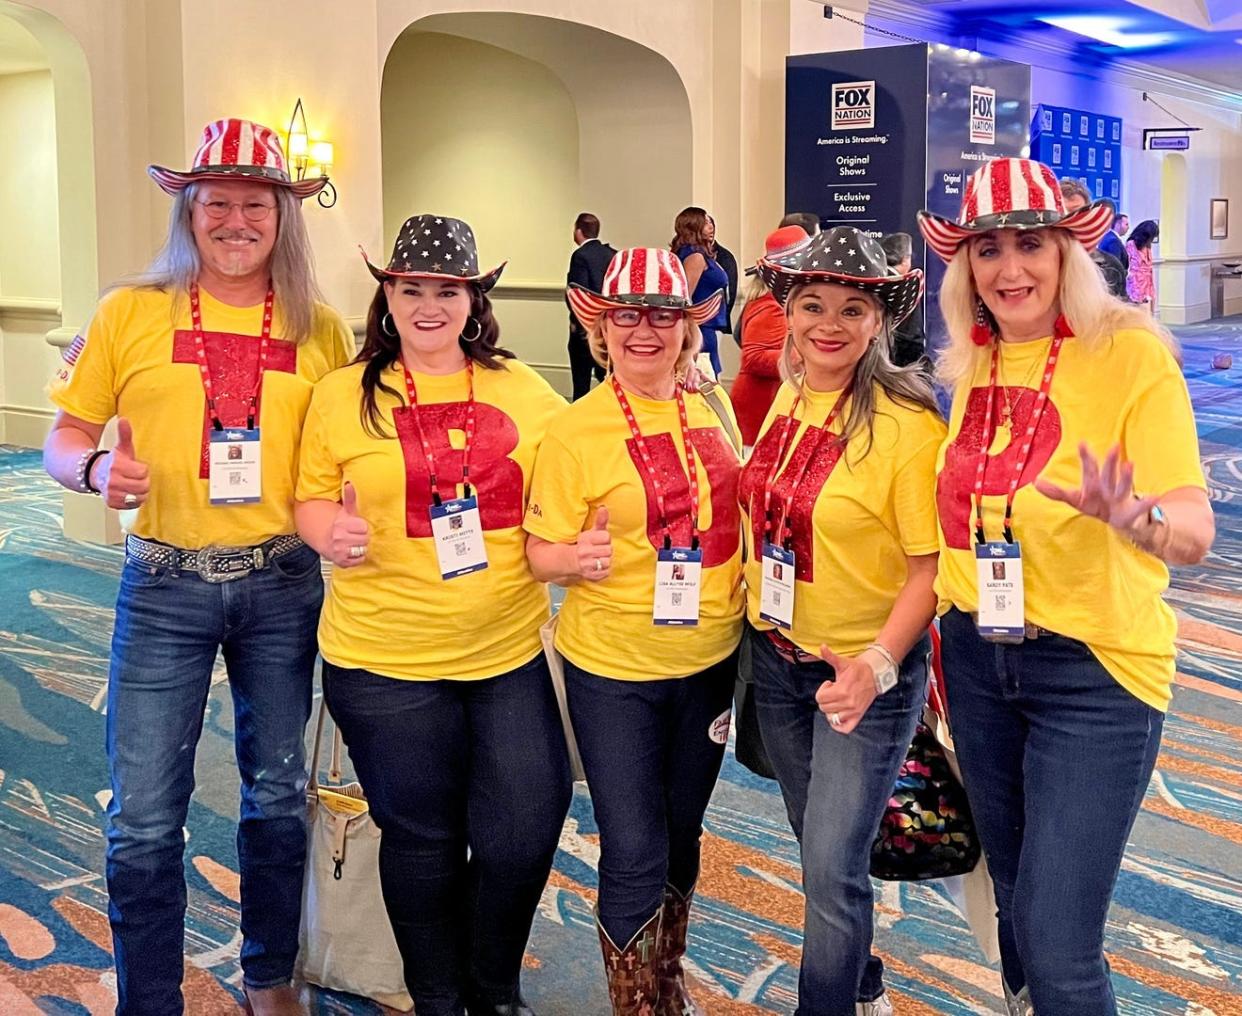 A group of Donald Trump fans show their support while attending the Conservative Political Action Conference, in Orlando, last week.